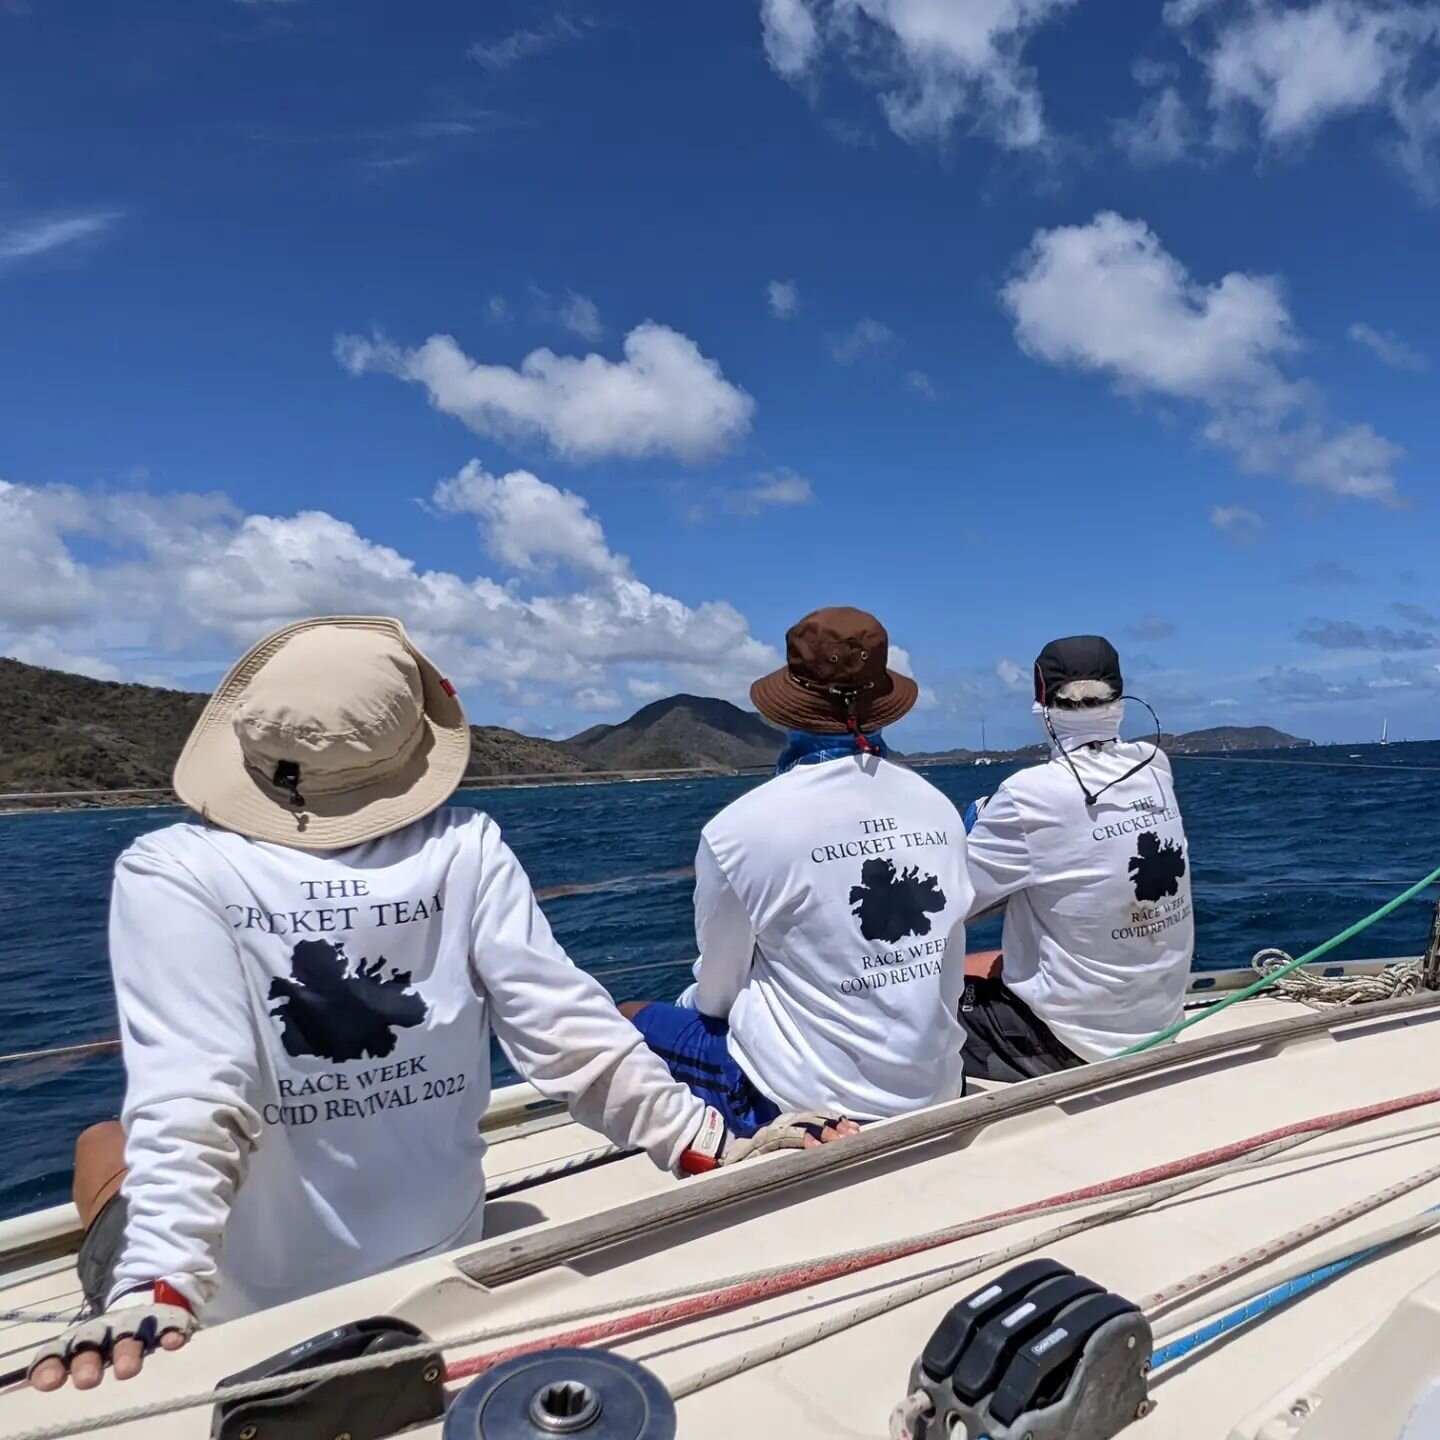 #antiguasailingweek is over, what an event✨! We had an amazing week, thank you all very much! Proud to say 5/5 Family members took part spontaneously AND raced: me on Cricket with Sandy Mair, and Christian and the Girls on Penmanship, a catamaran 72 